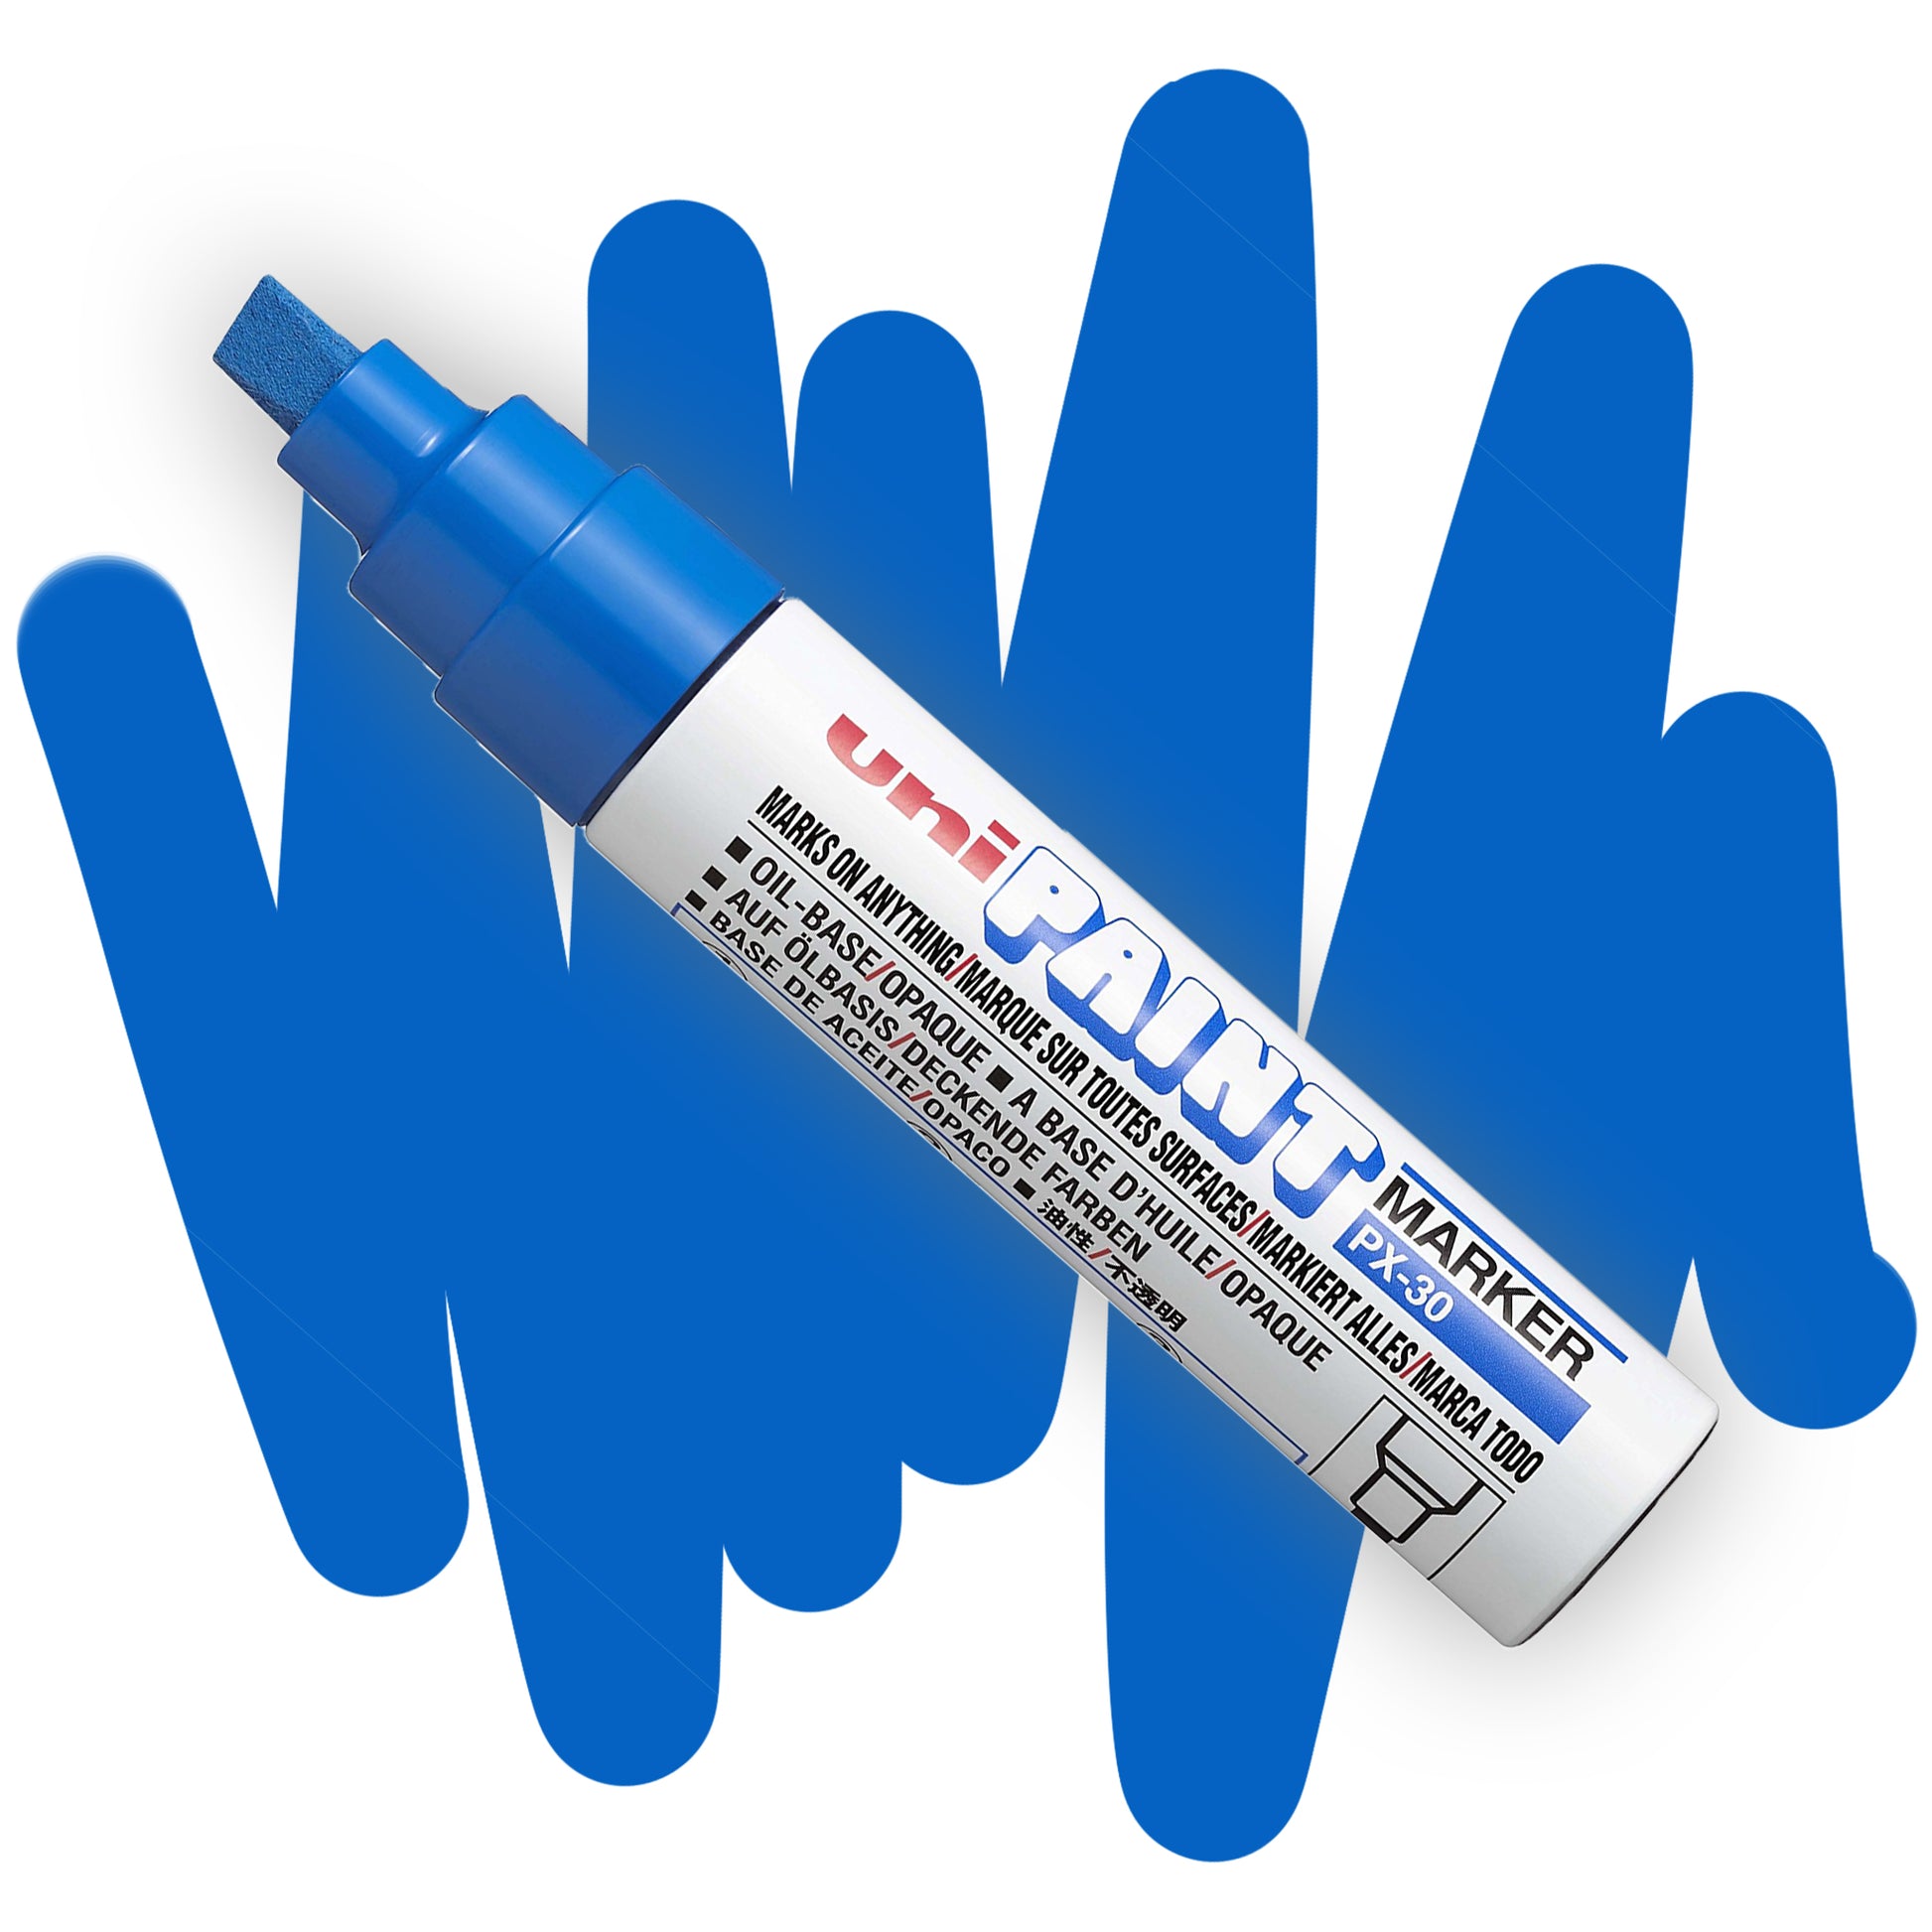 Uni paint chisel tip markers px-30 in blue.